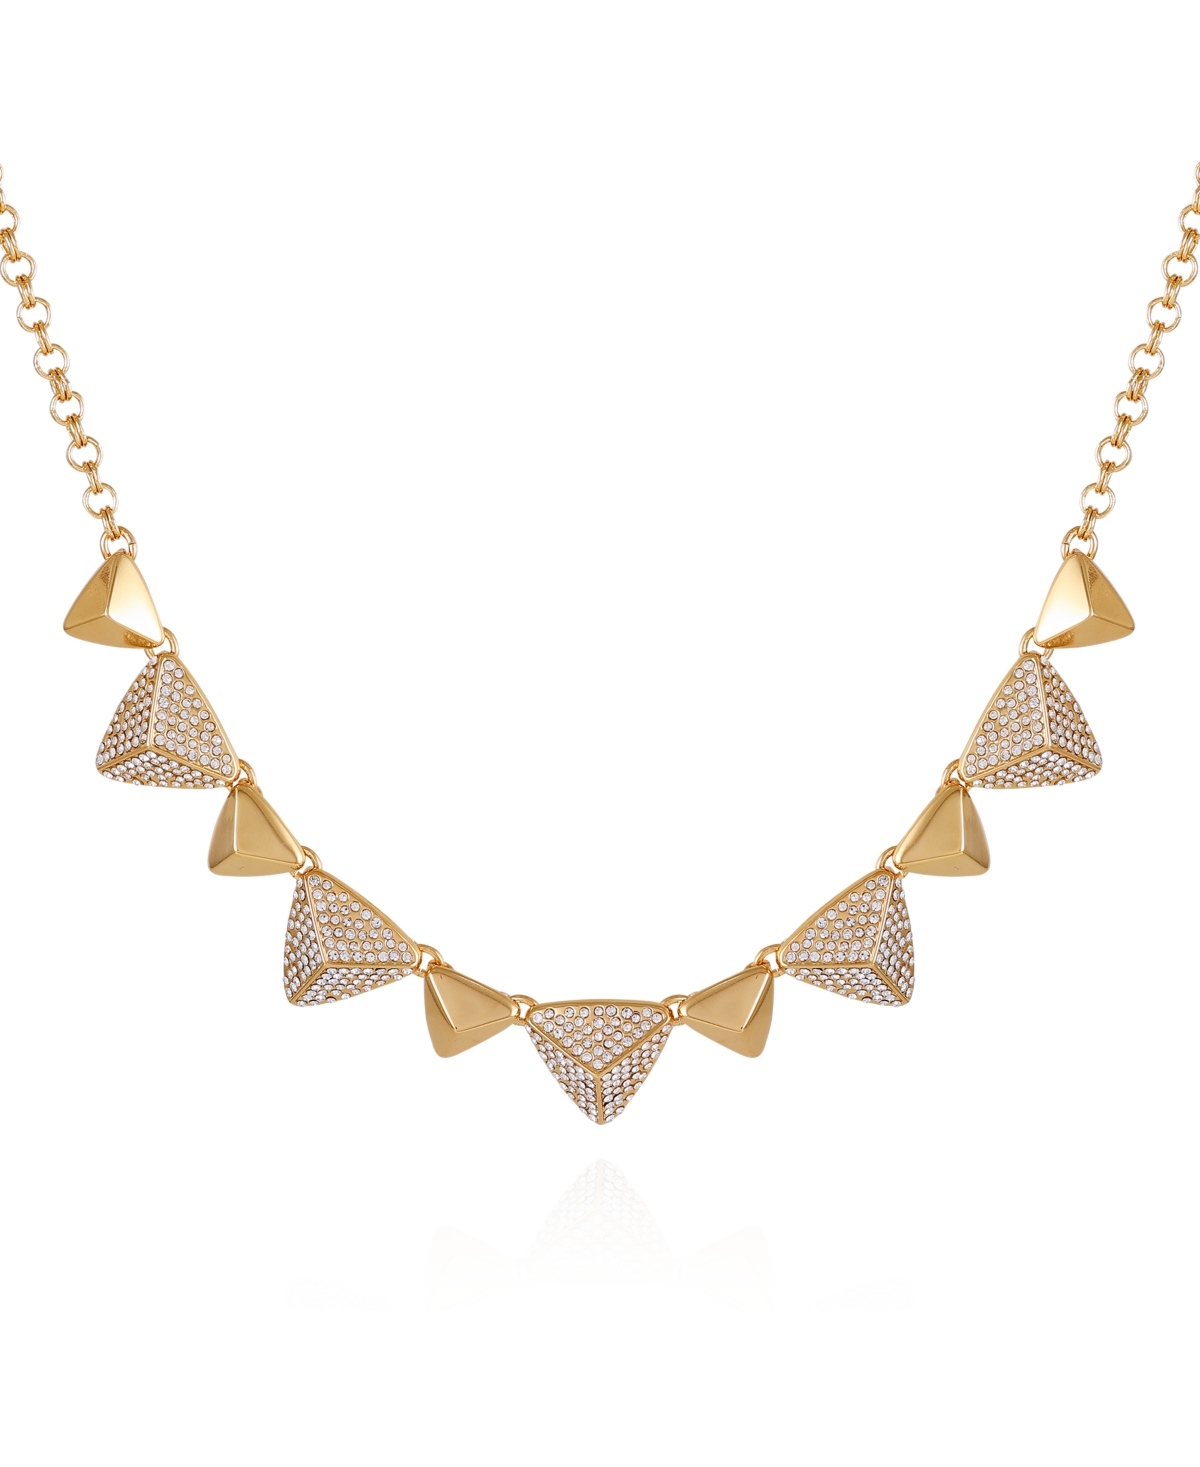 T Tahari Gold-tone Pave Glass Stone Statement Necklace